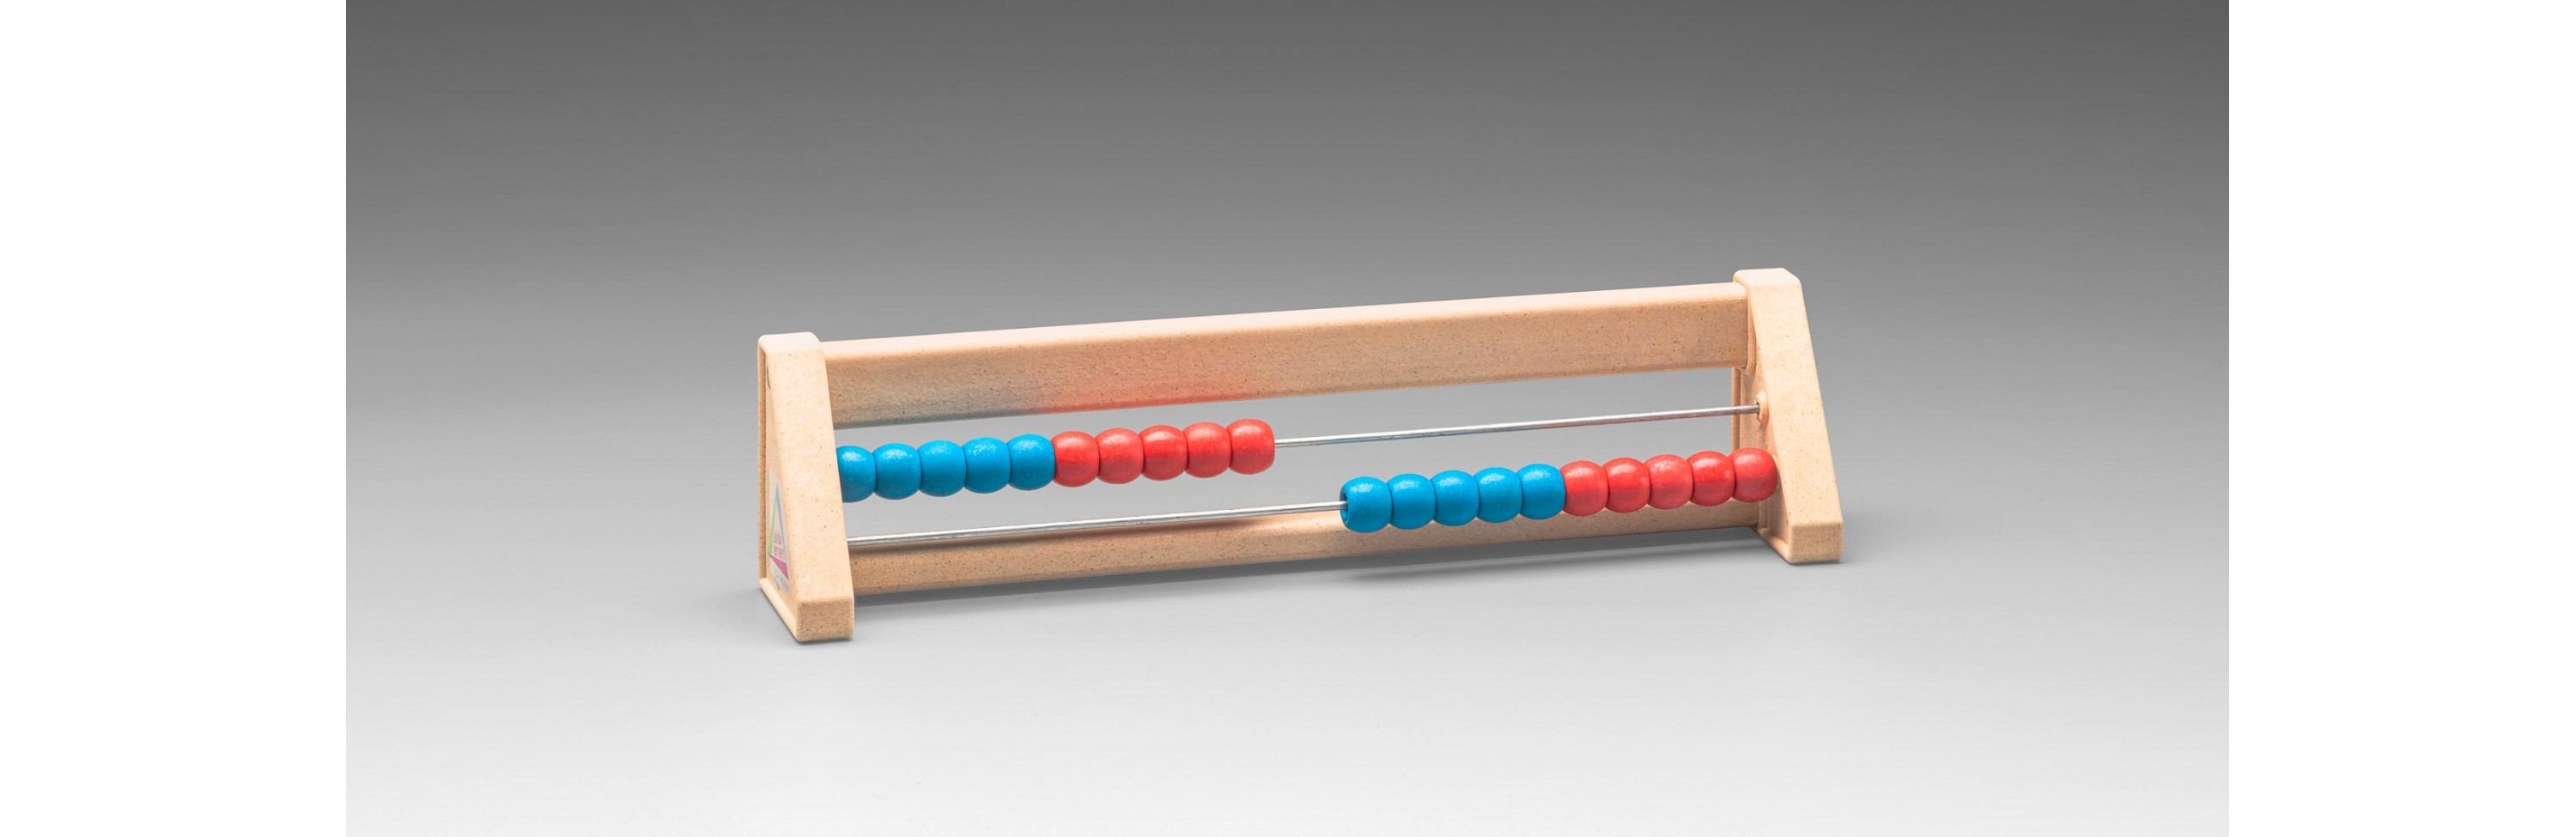 Wissner® active learning - Abacus with 20 balls red / blue RE-Wood®